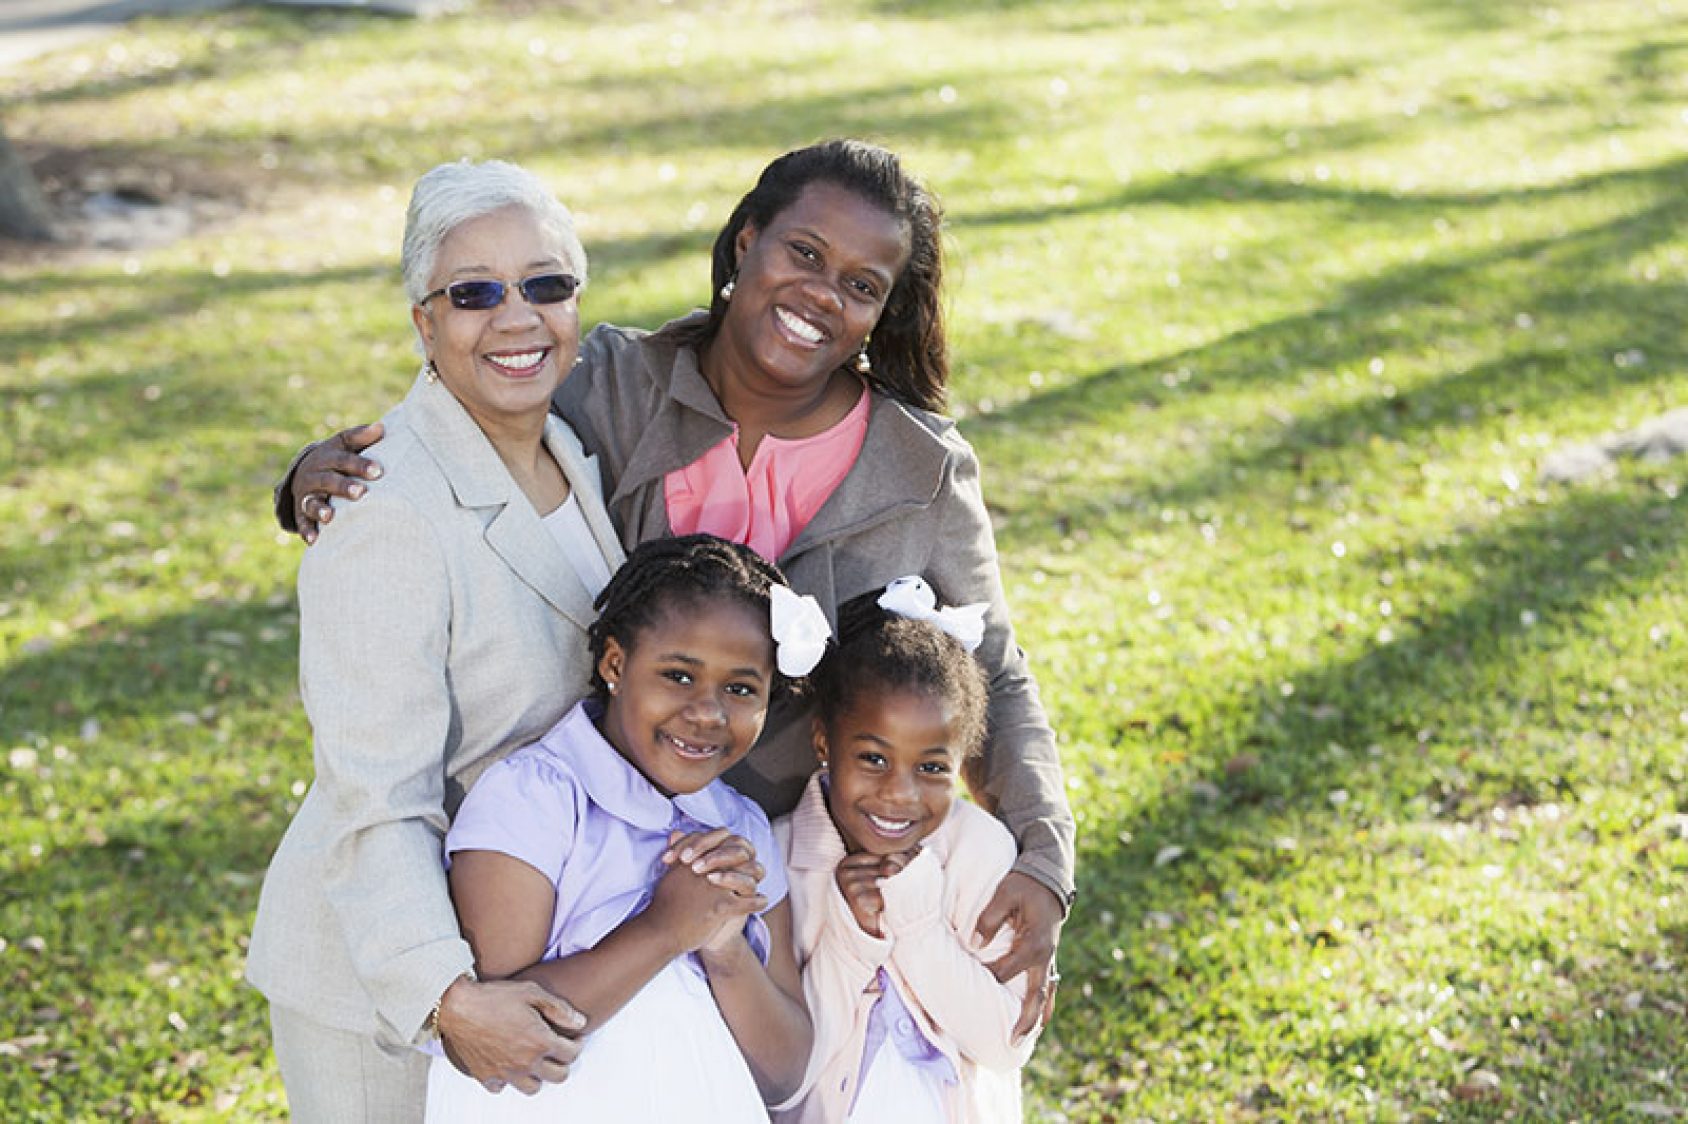 an image of an African-American family embracing each other for a family photo outside at a park